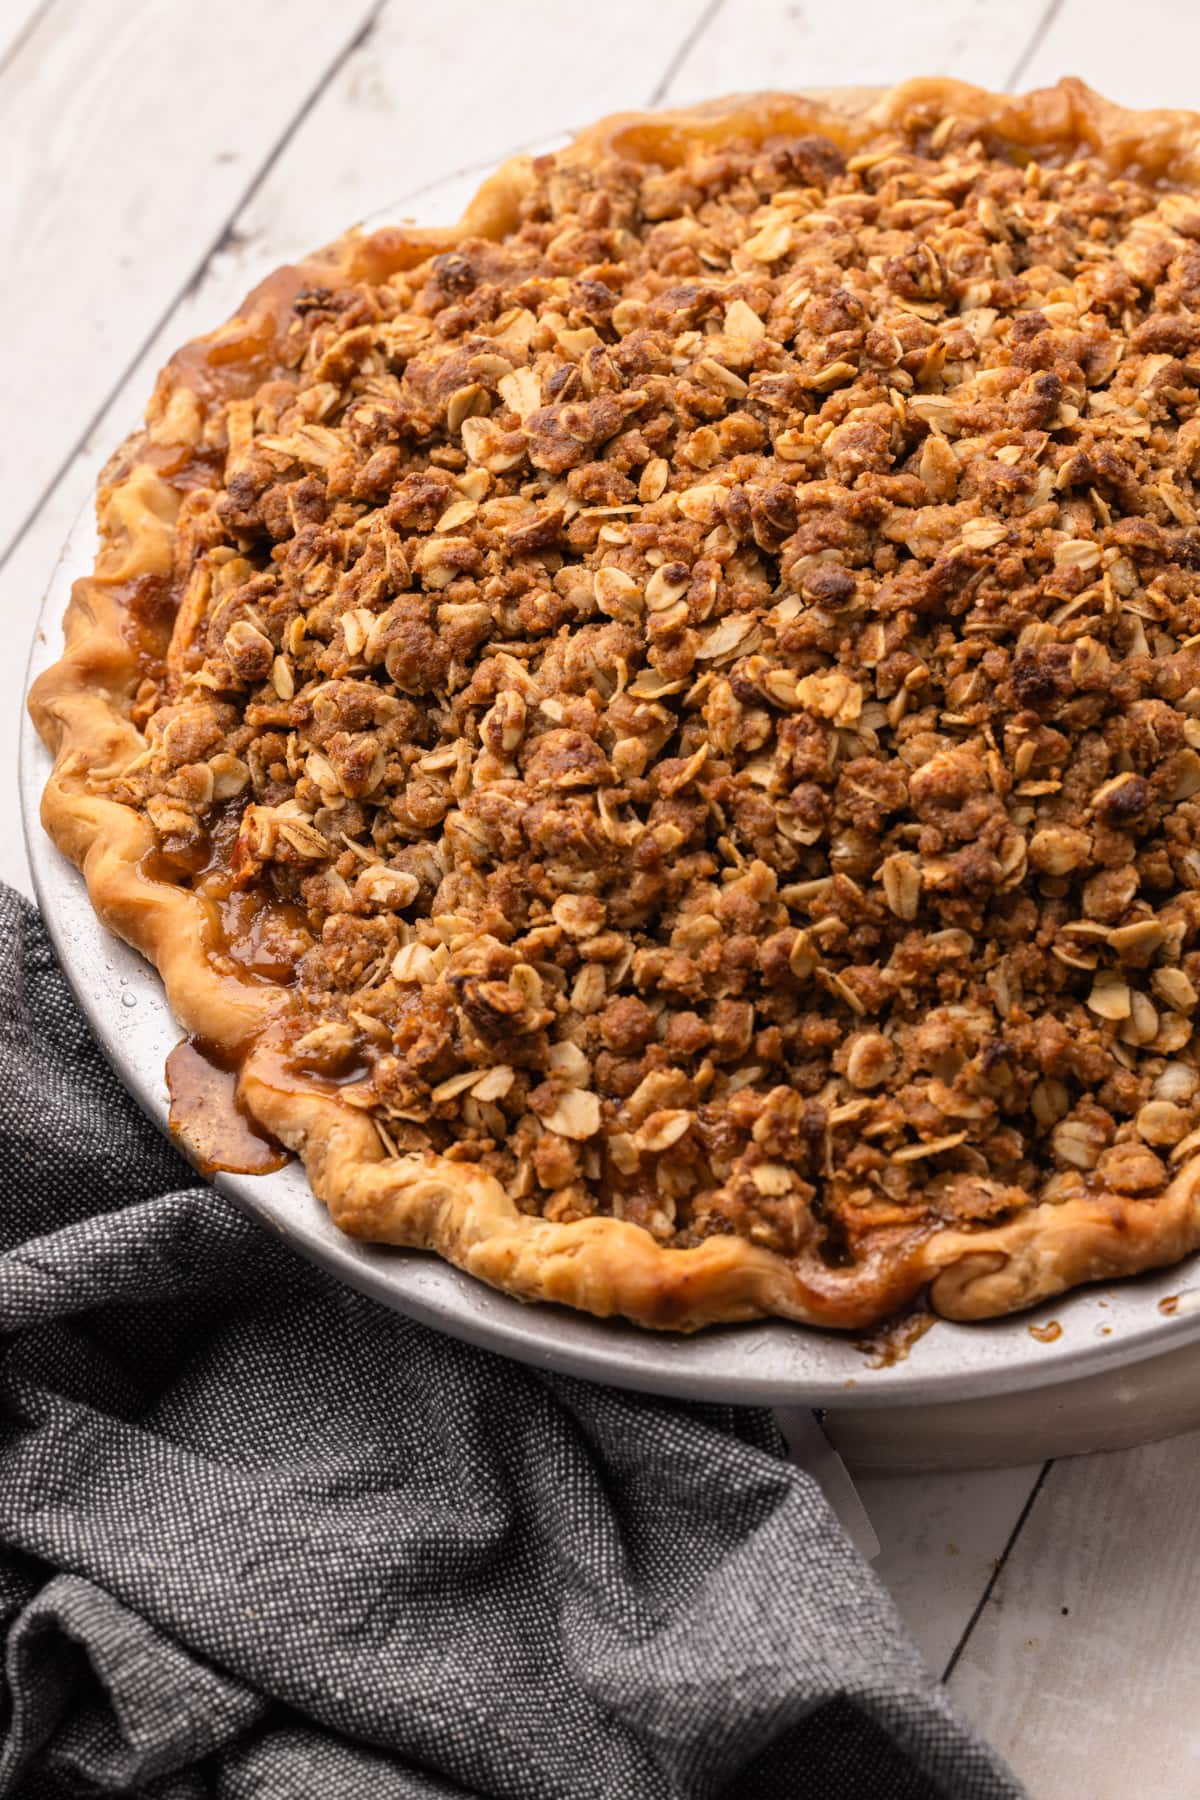 A fully baked apple crumb pie with an oat struesel topping.